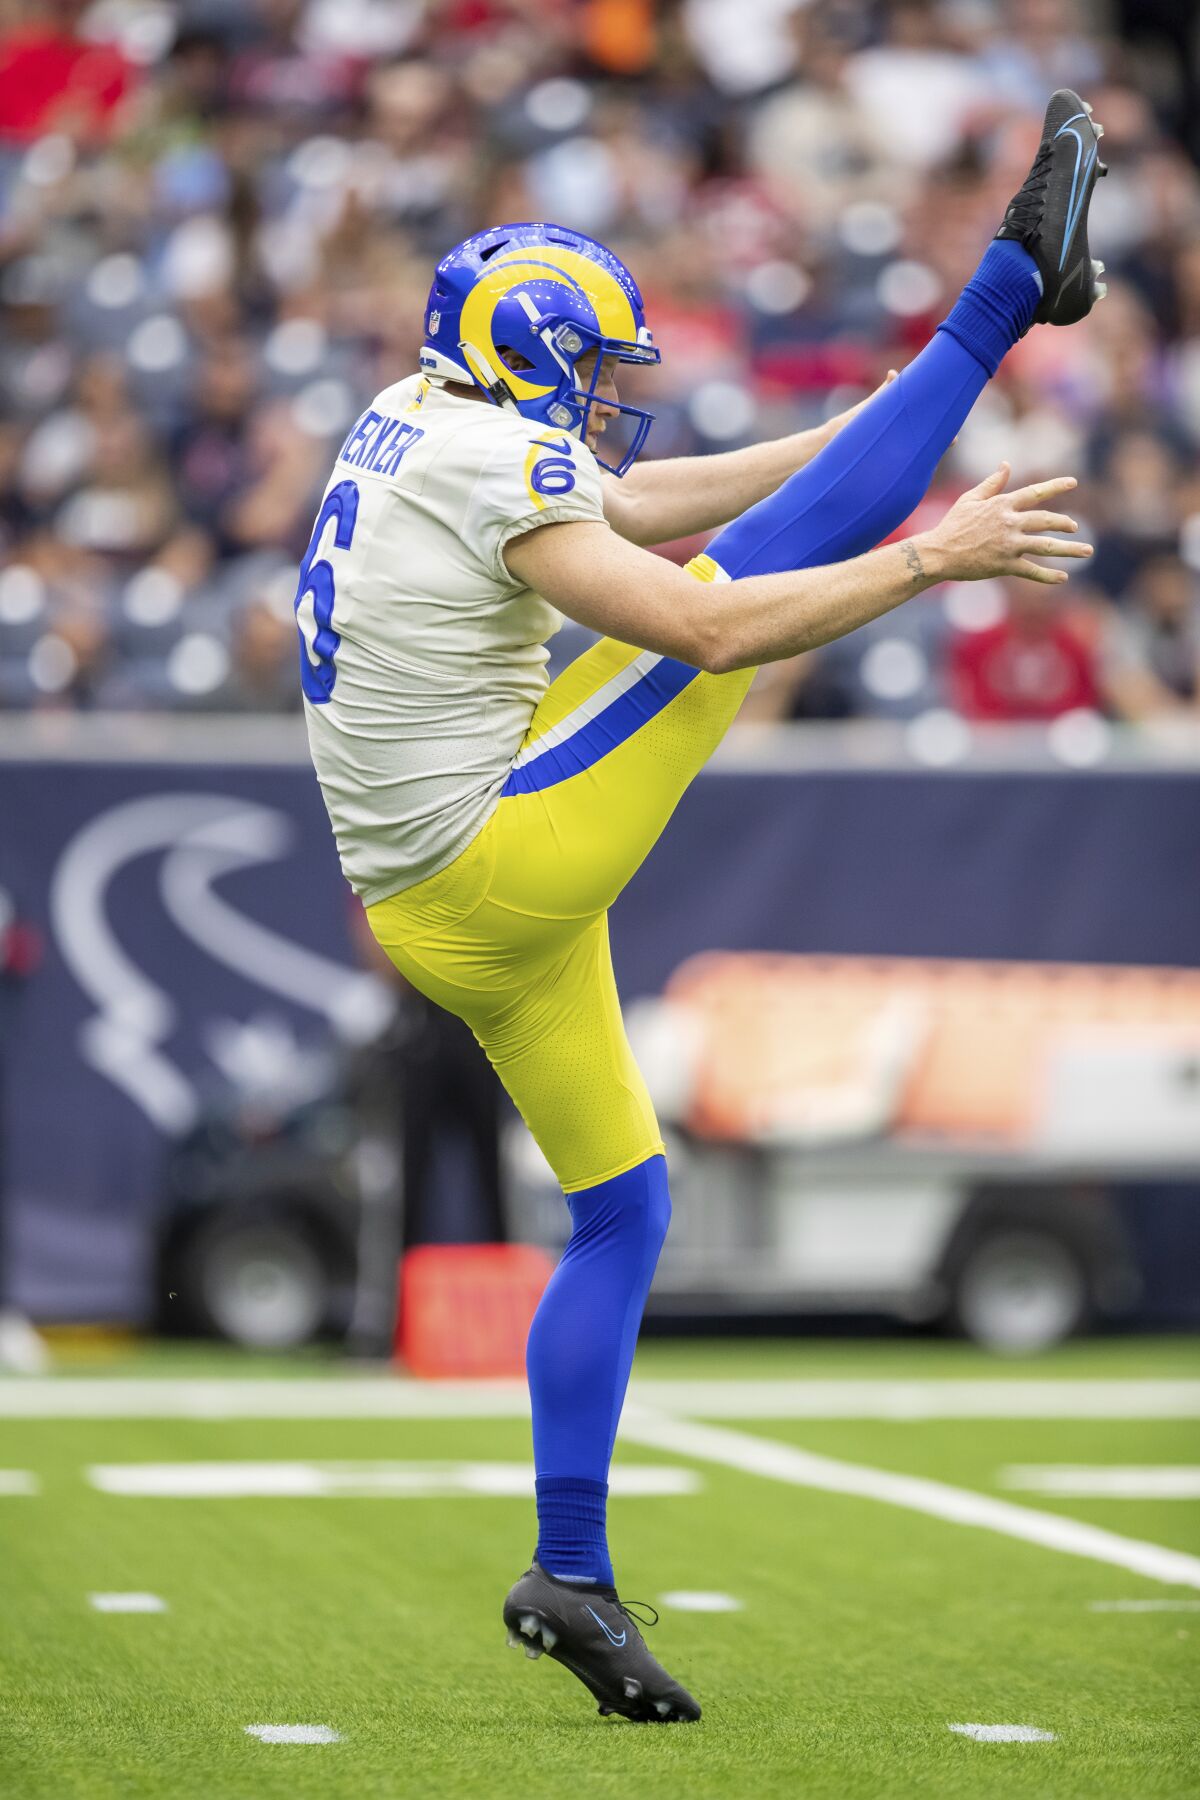 Johnny Hekker punts for the Rams against the Houston Texans in October.